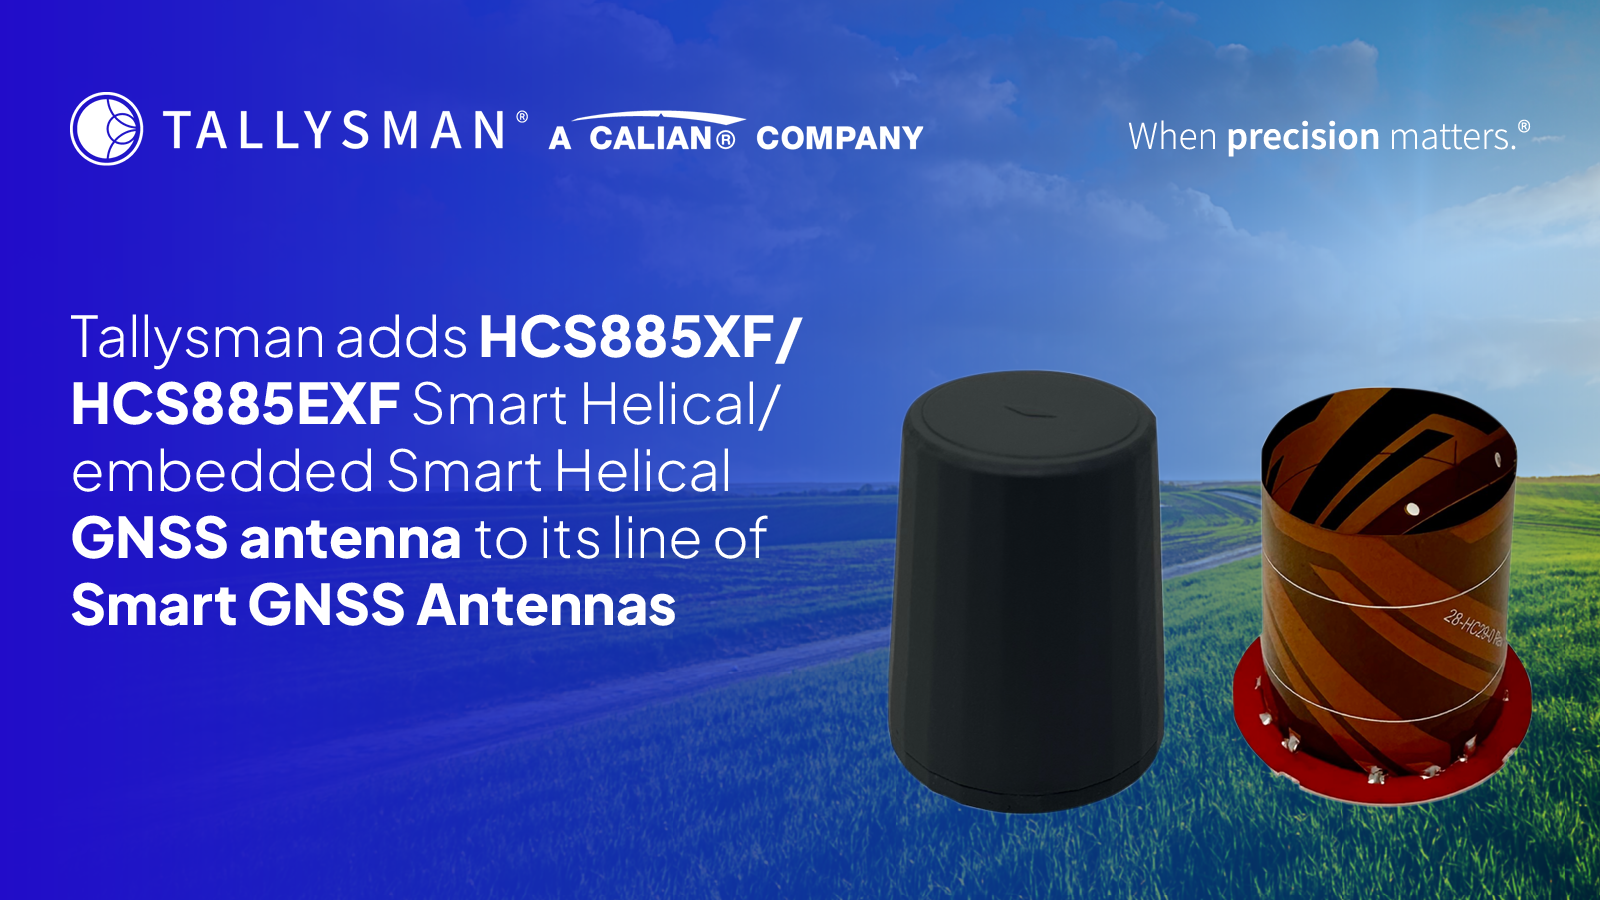 Tallysman adds HCS885XF/HCS885EXF Smart Helical/embedded Smart Helical GNSS antenna to its line of Smart GNSS Antennas